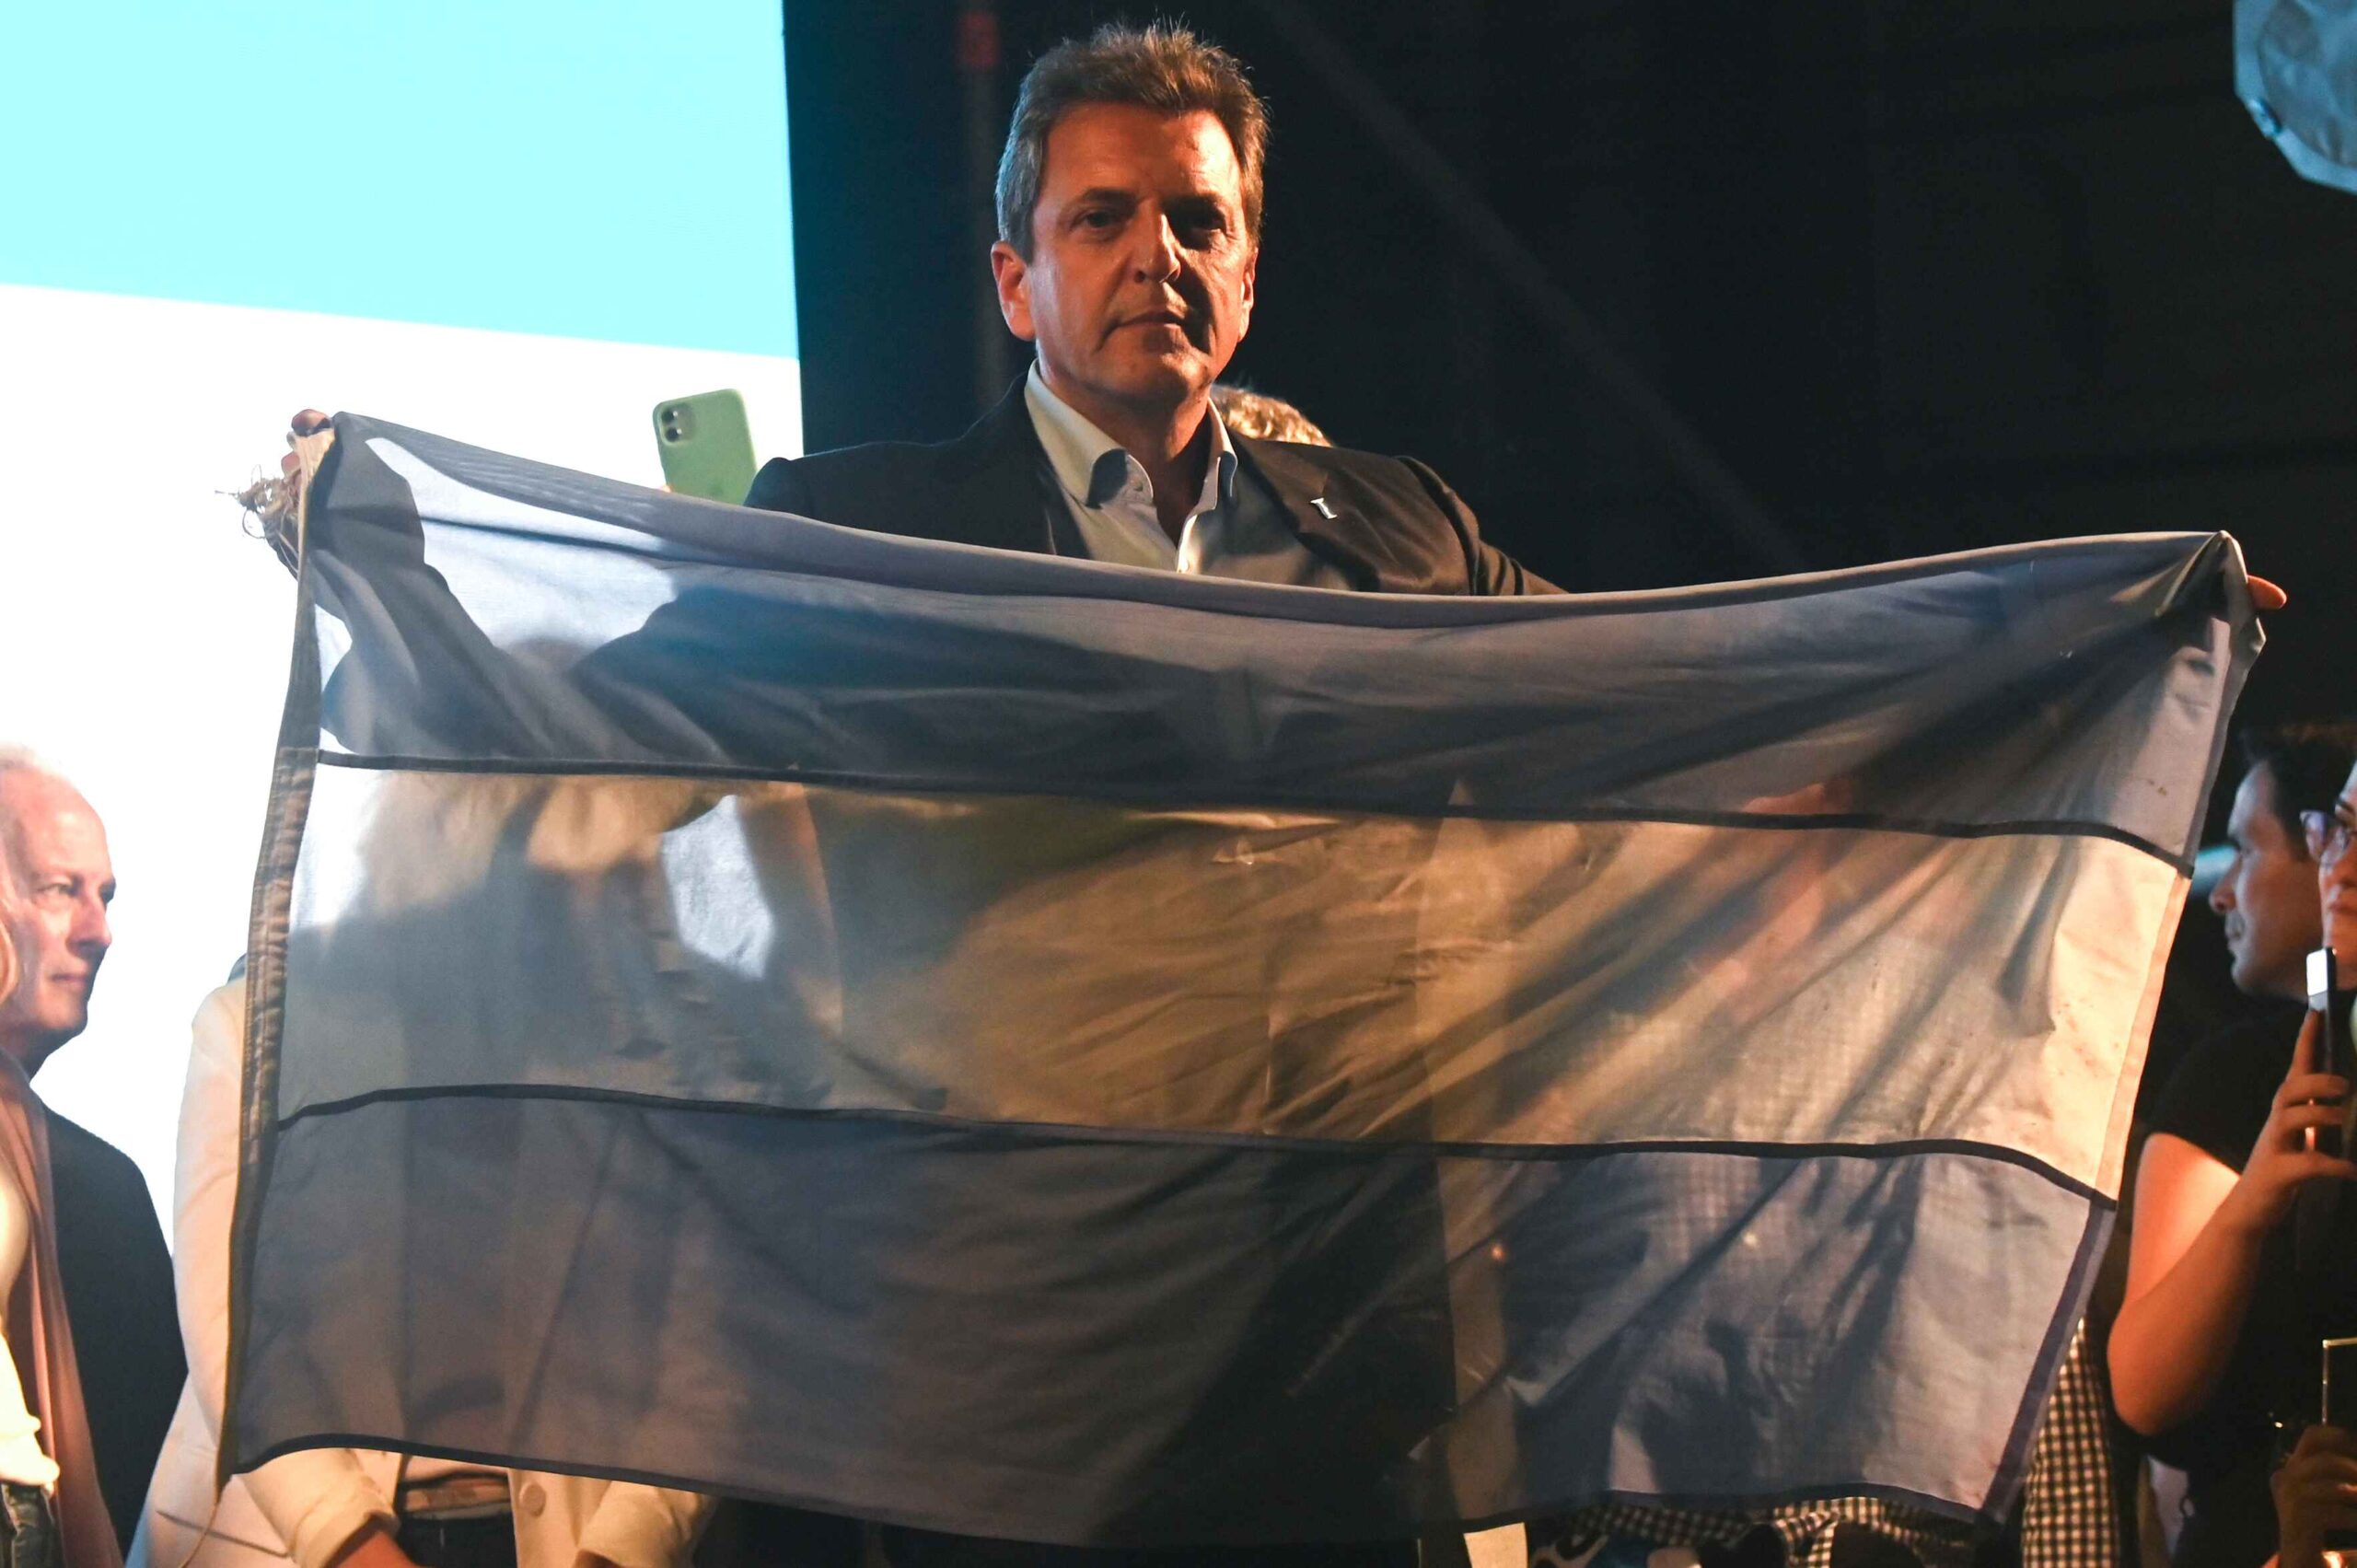 The presidential election in Argentina saw a victory by Economy Minister Sergio Massa, setting up a runoff election against libertarian Javier Milei next month. (AP Photo/Mario De Fina)